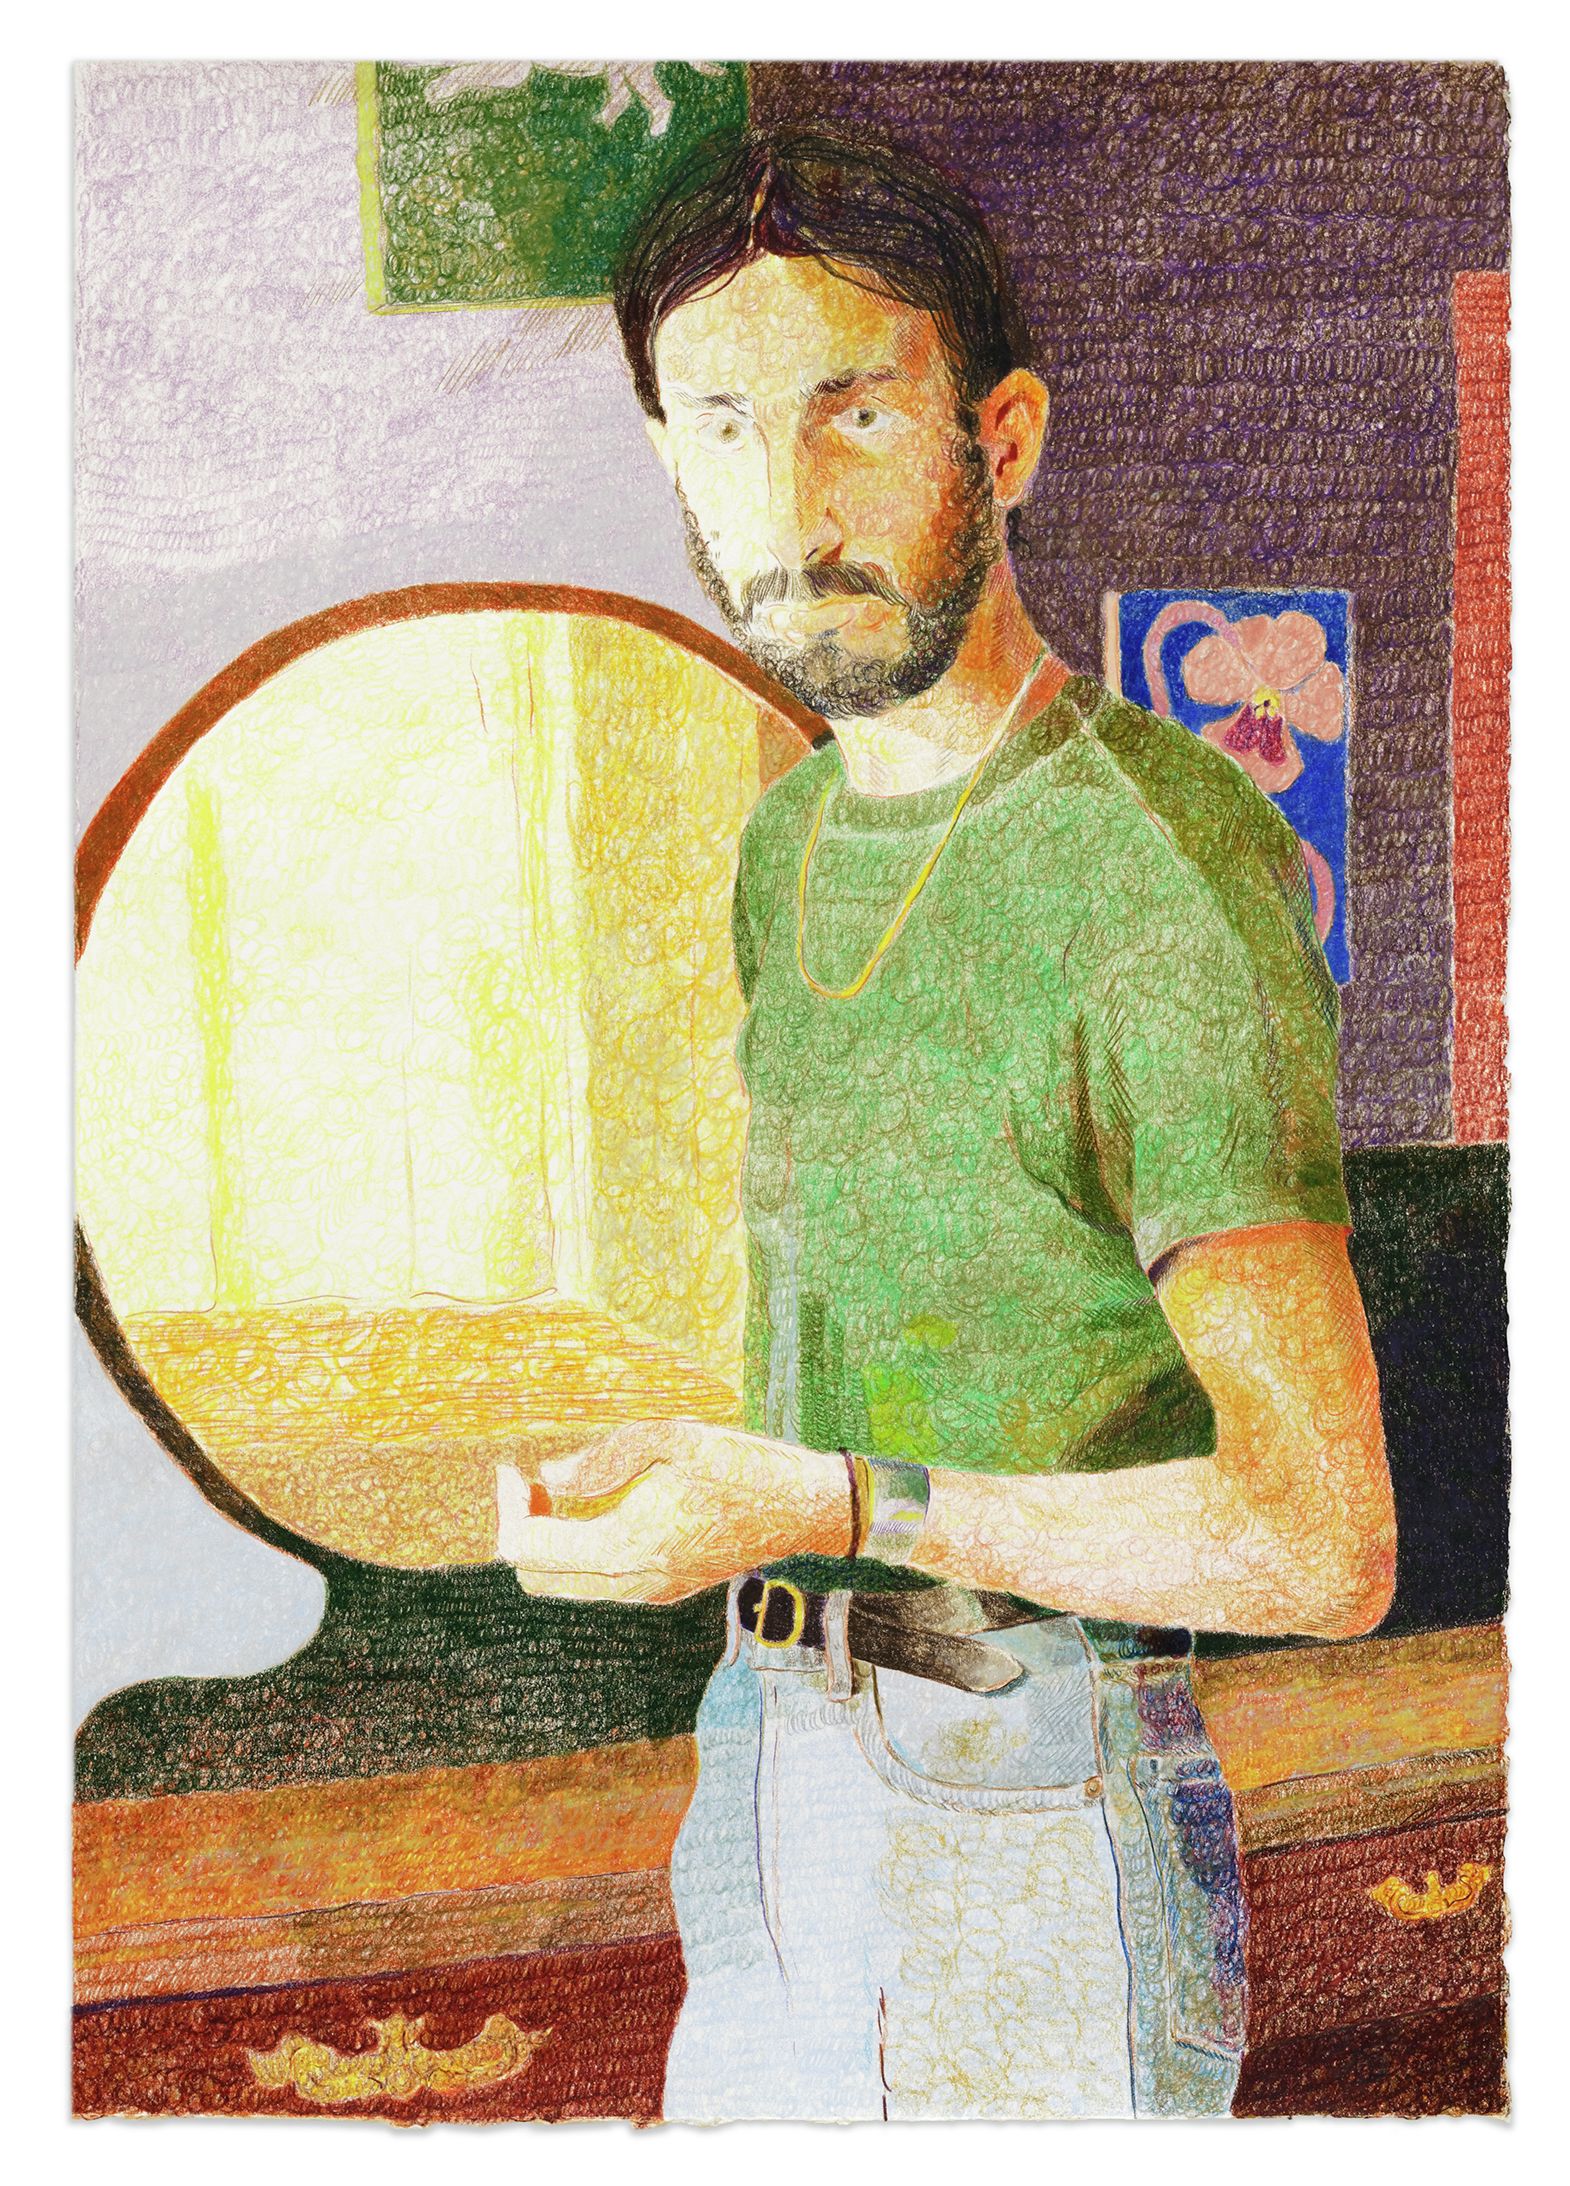 Anthony Cudahy, By the mirror, 2021 Crayons de couleur sur papier76 × 56 cm / 29 7/8 × 22  in.